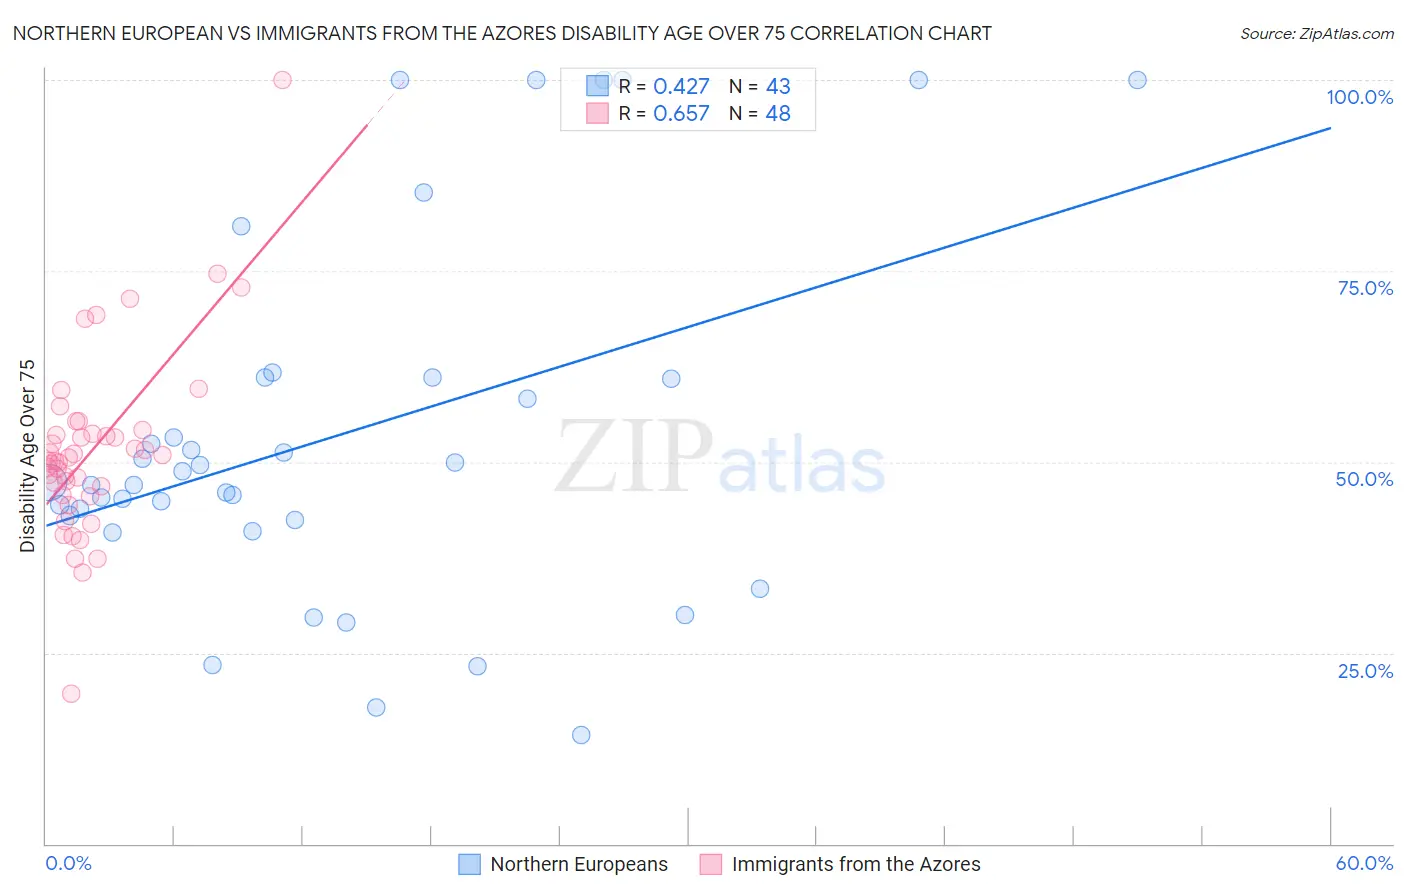 Northern European vs Immigrants from the Azores Disability Age Over 75